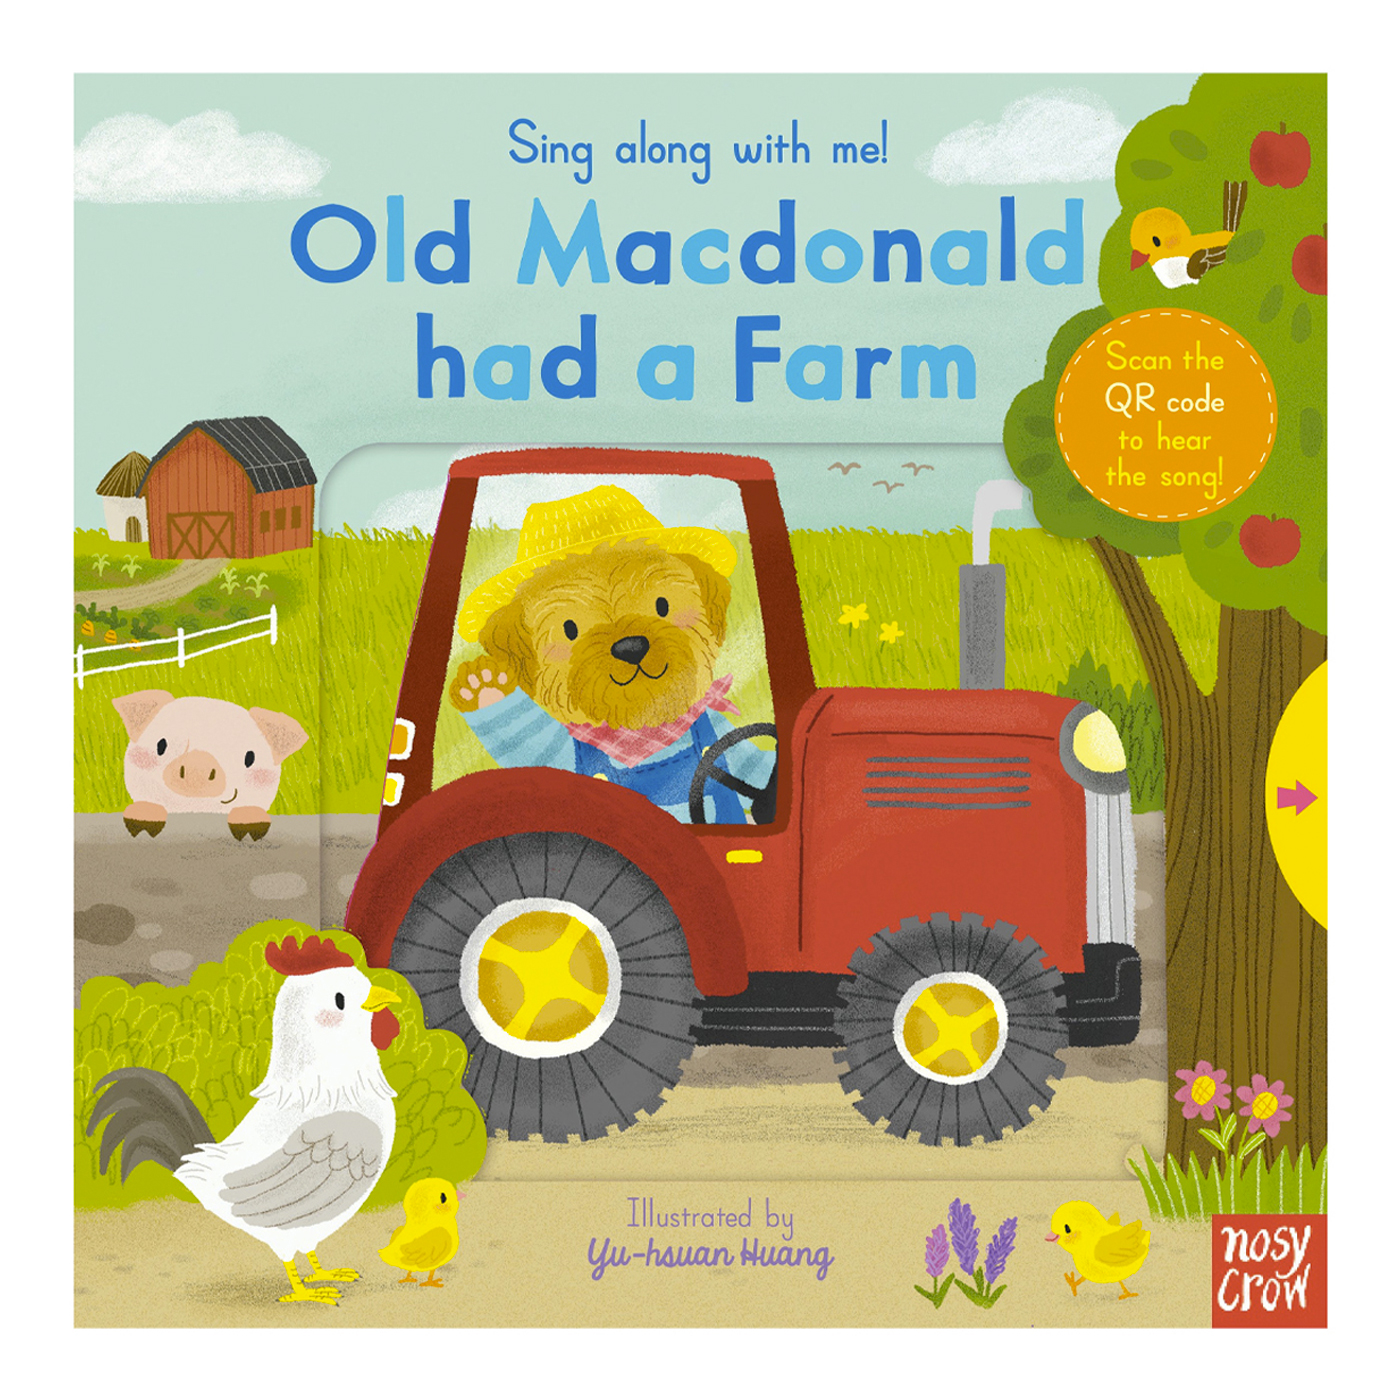  Sing along with me! Old Macdonald had a Farm